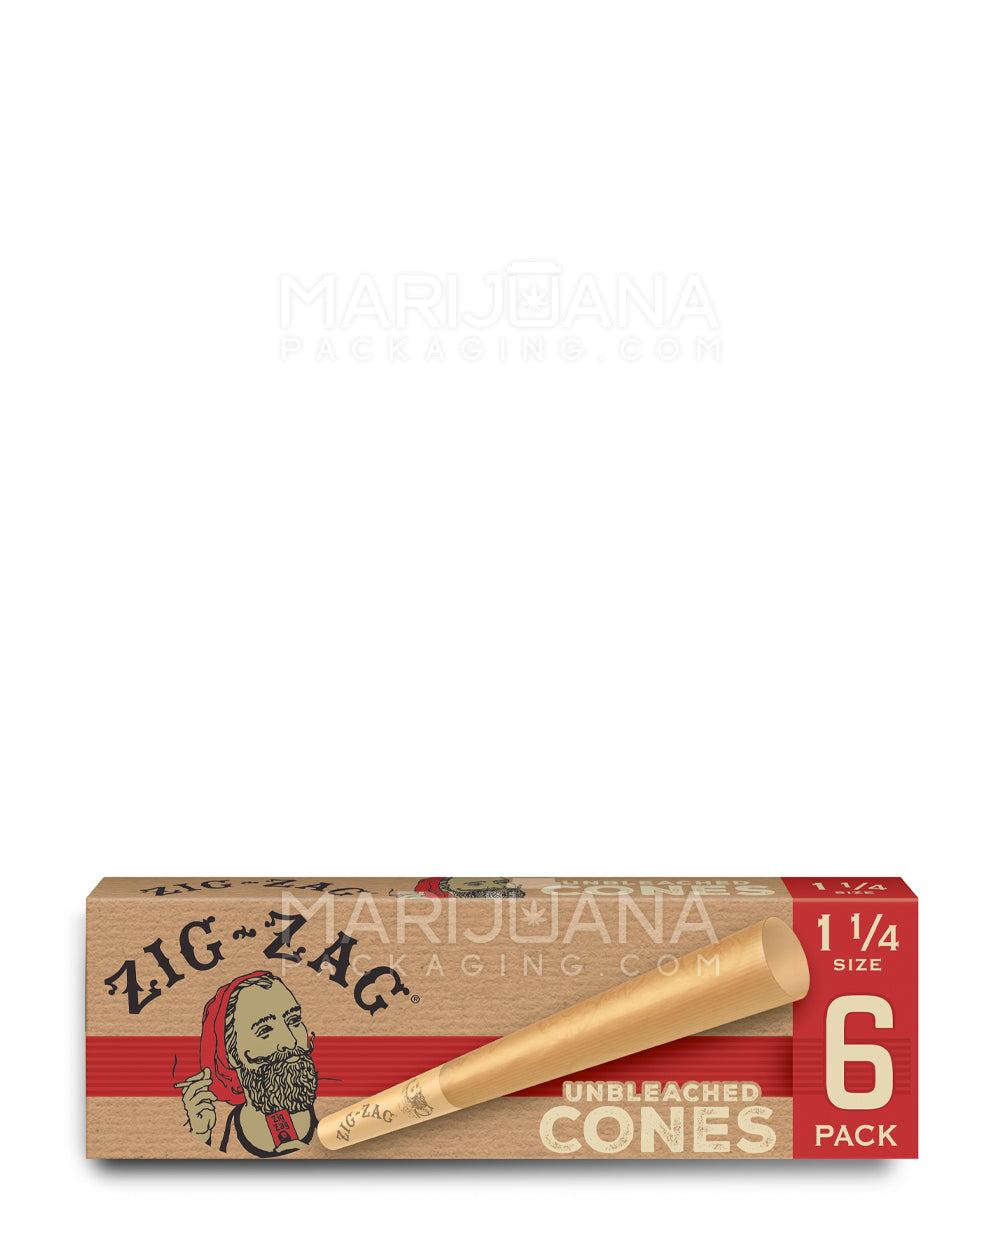 ZIG ZAG | 'Retail Display' 1 1/4 Pre-Rolled Cones Promo Pack | 84mm - Unbleached Paper - 36 Count - 3